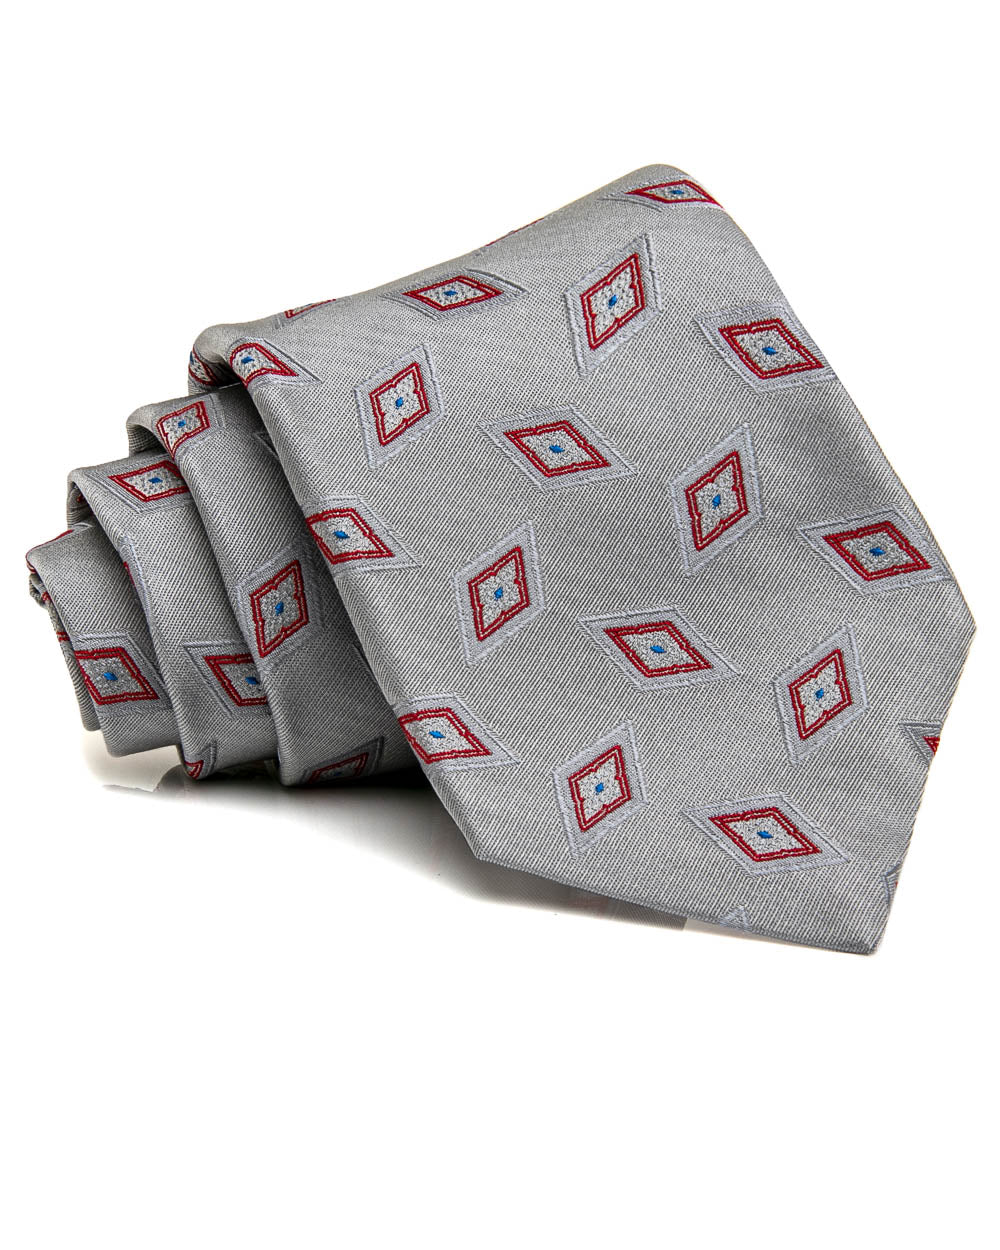 Silver and Red Geometric Tie